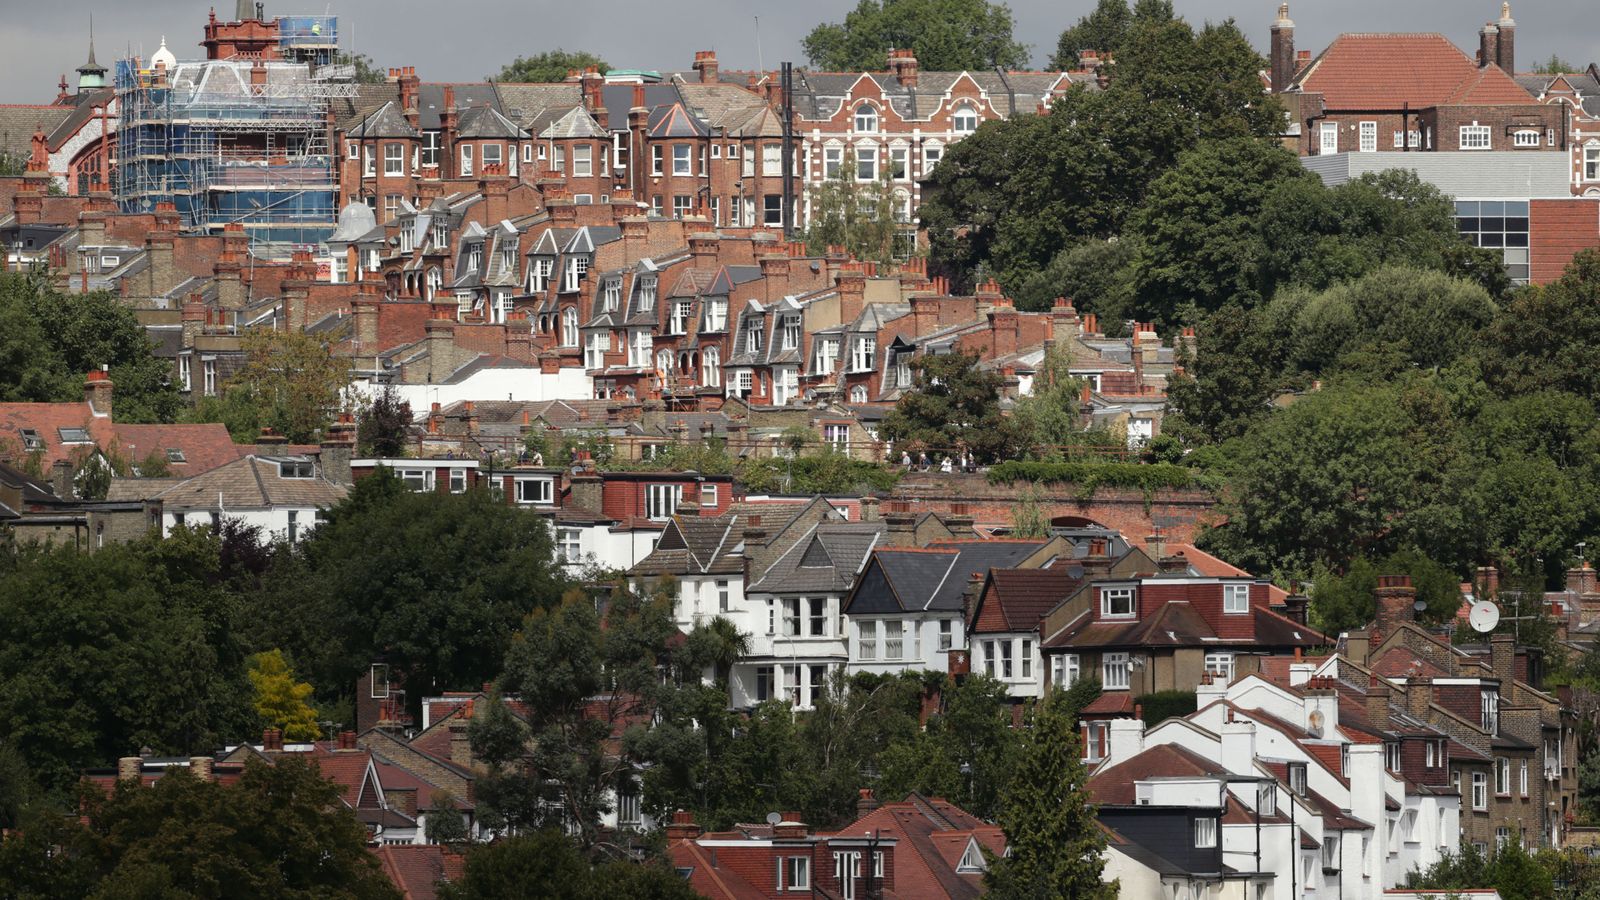 Annual mortgage repayments set to rise by £2,900 on average next year, says think tank